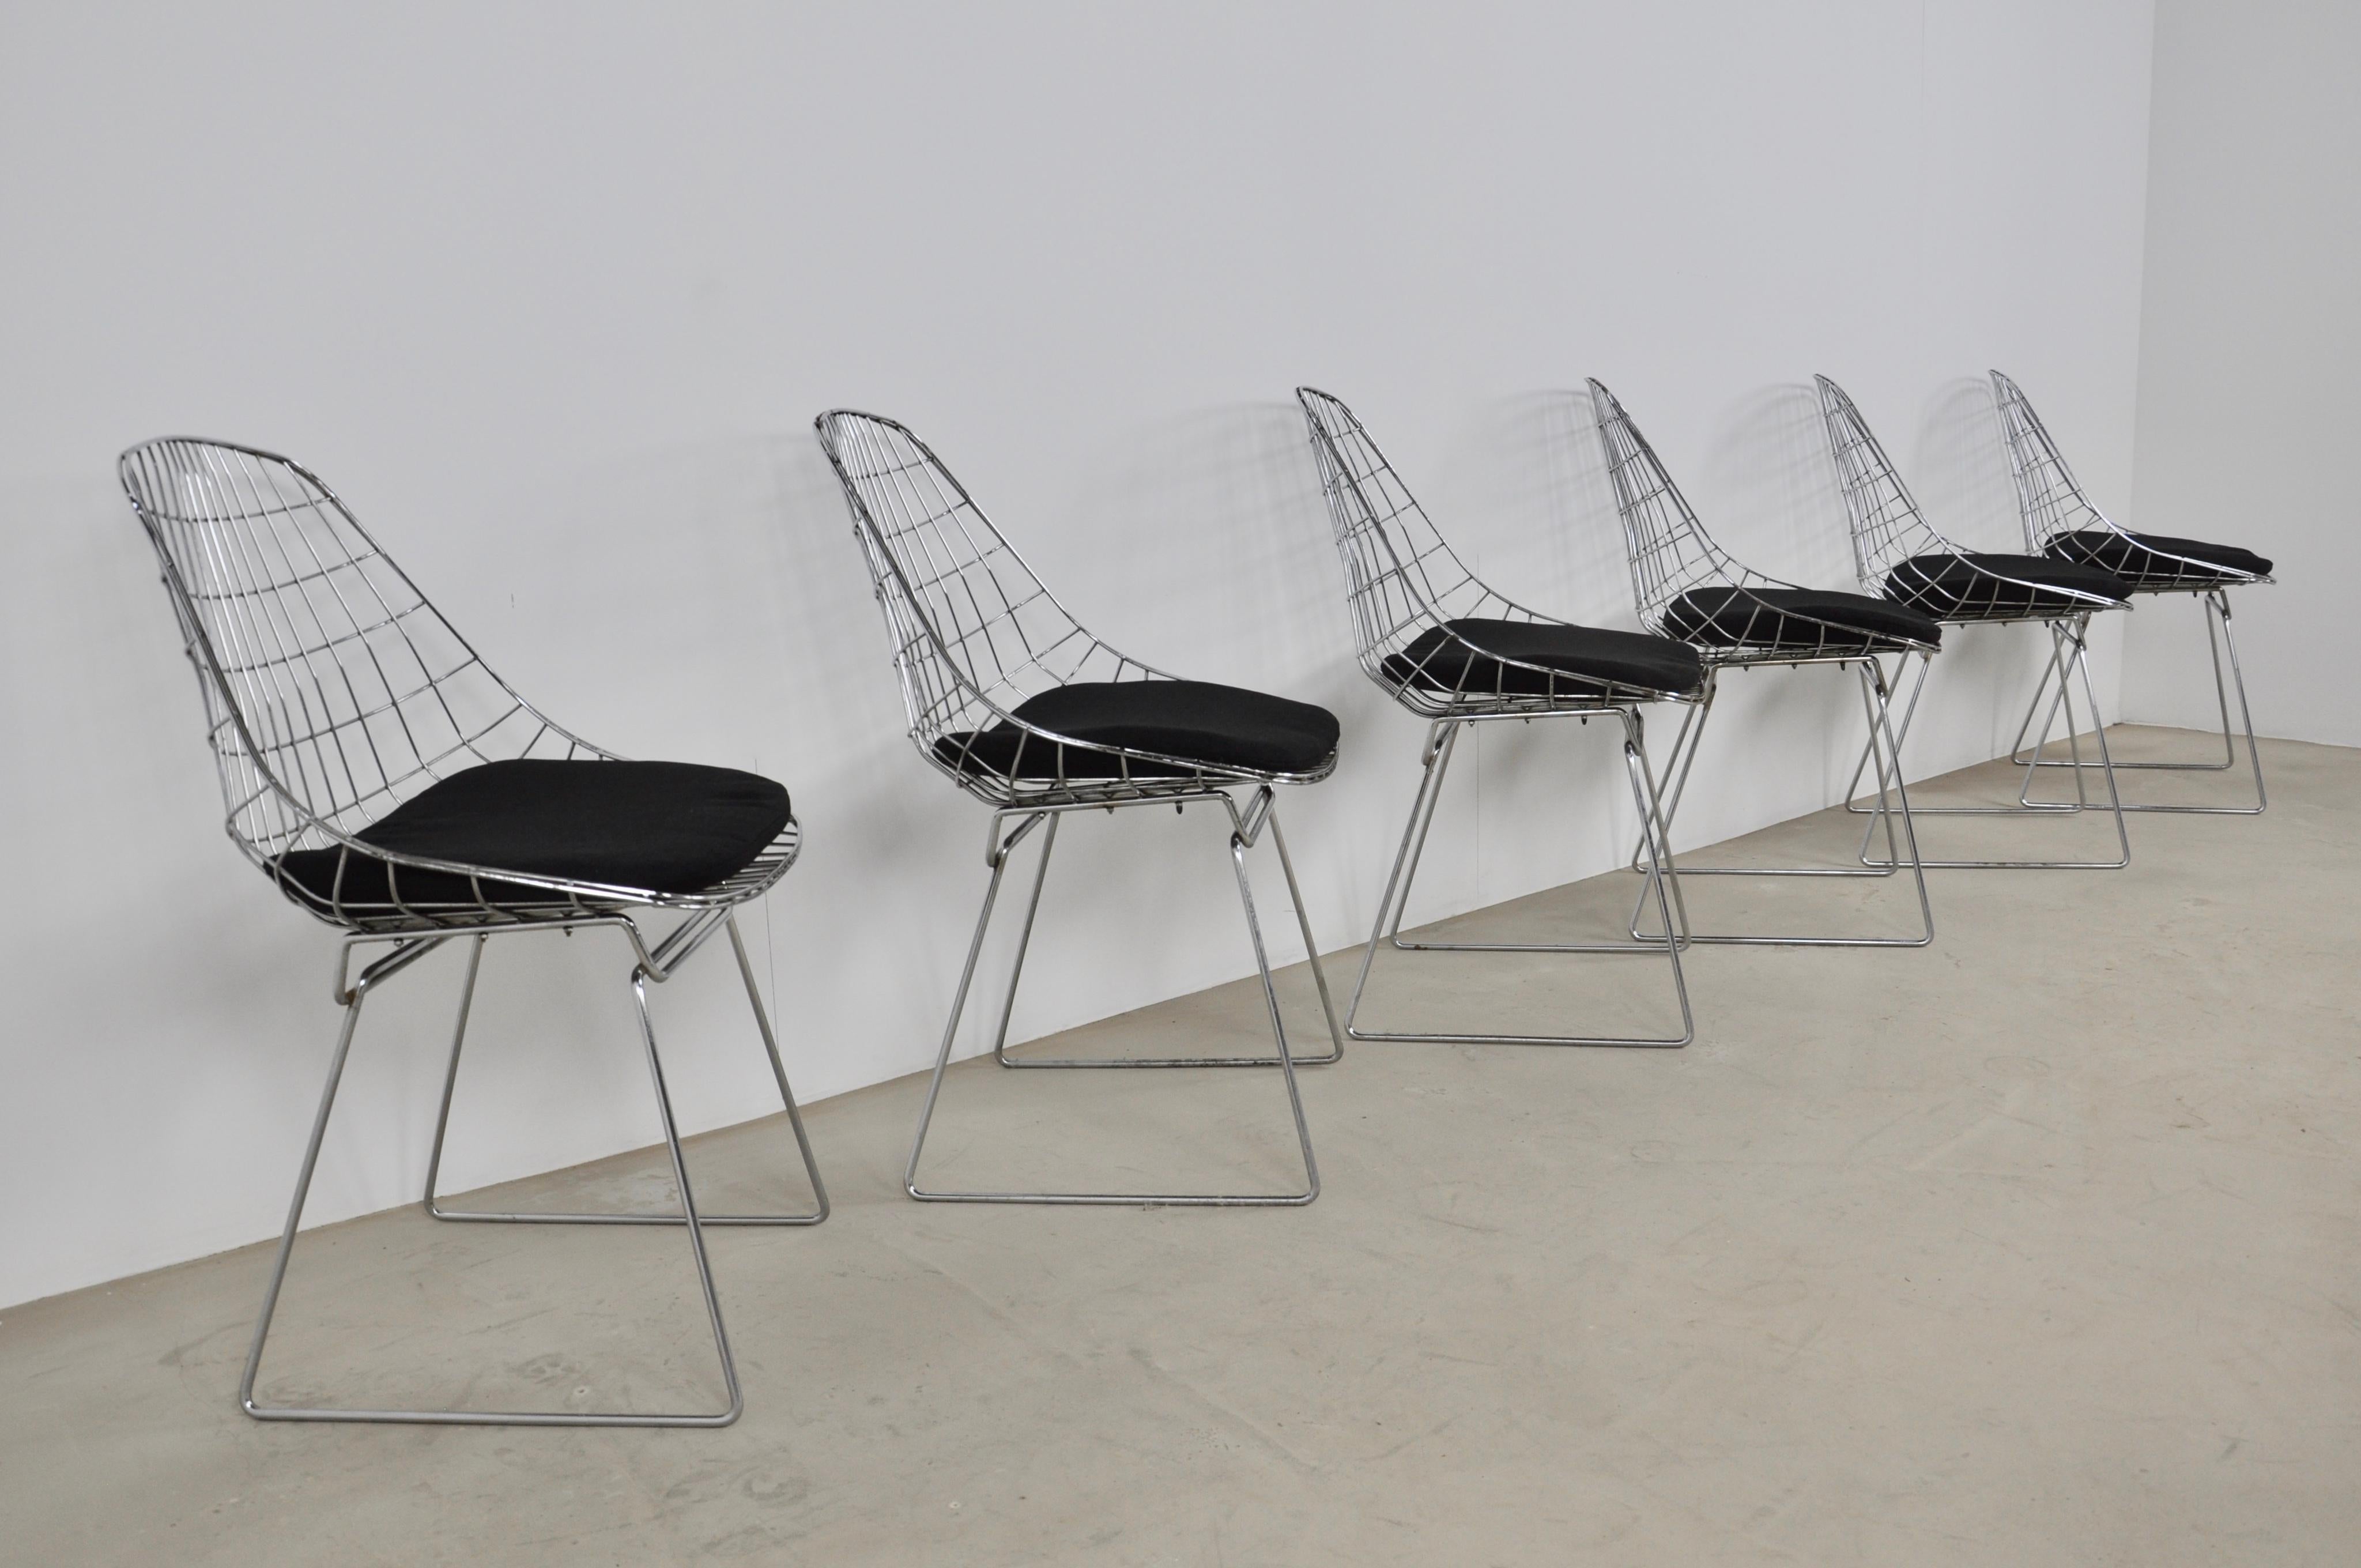 Set of 6 chromed metal chairs. Black fabric seat, removable cover. Wear on some chairs at the chrome level (see photos). Wear due to time and the age of the object.